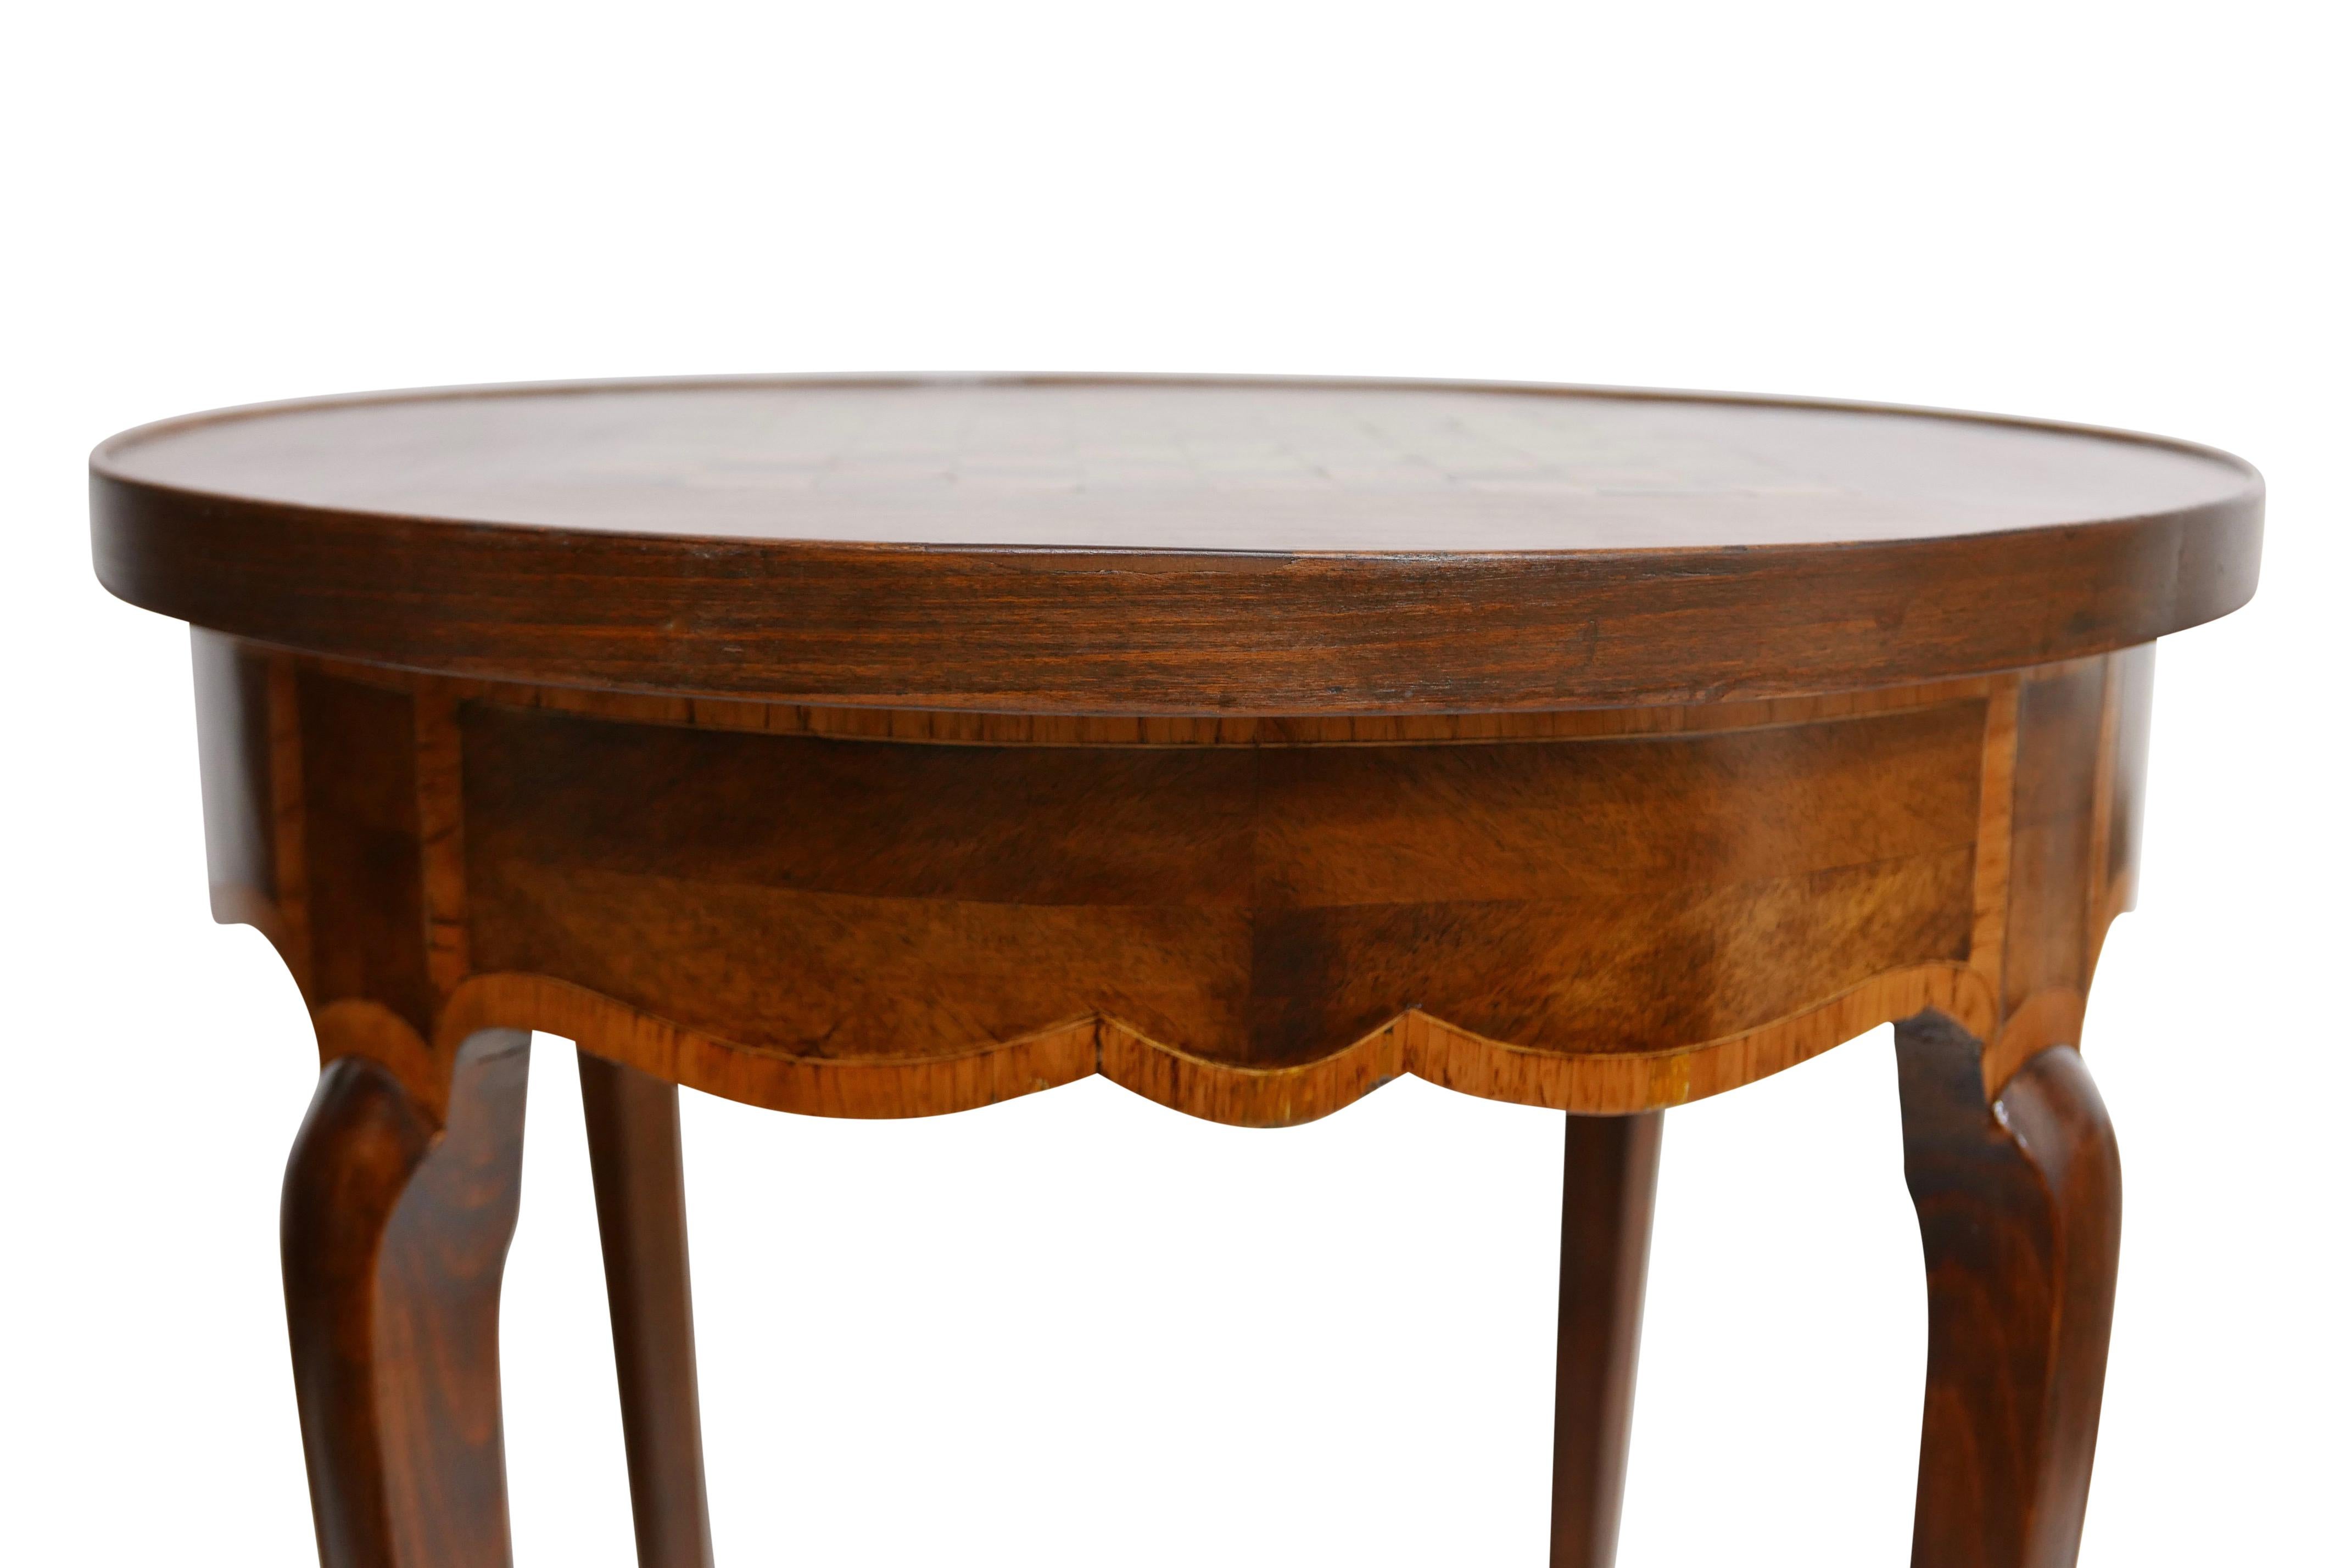 Walnut Circular Tric Trac Game Table with Fruitwood Inlay, Mid-19th Century 1